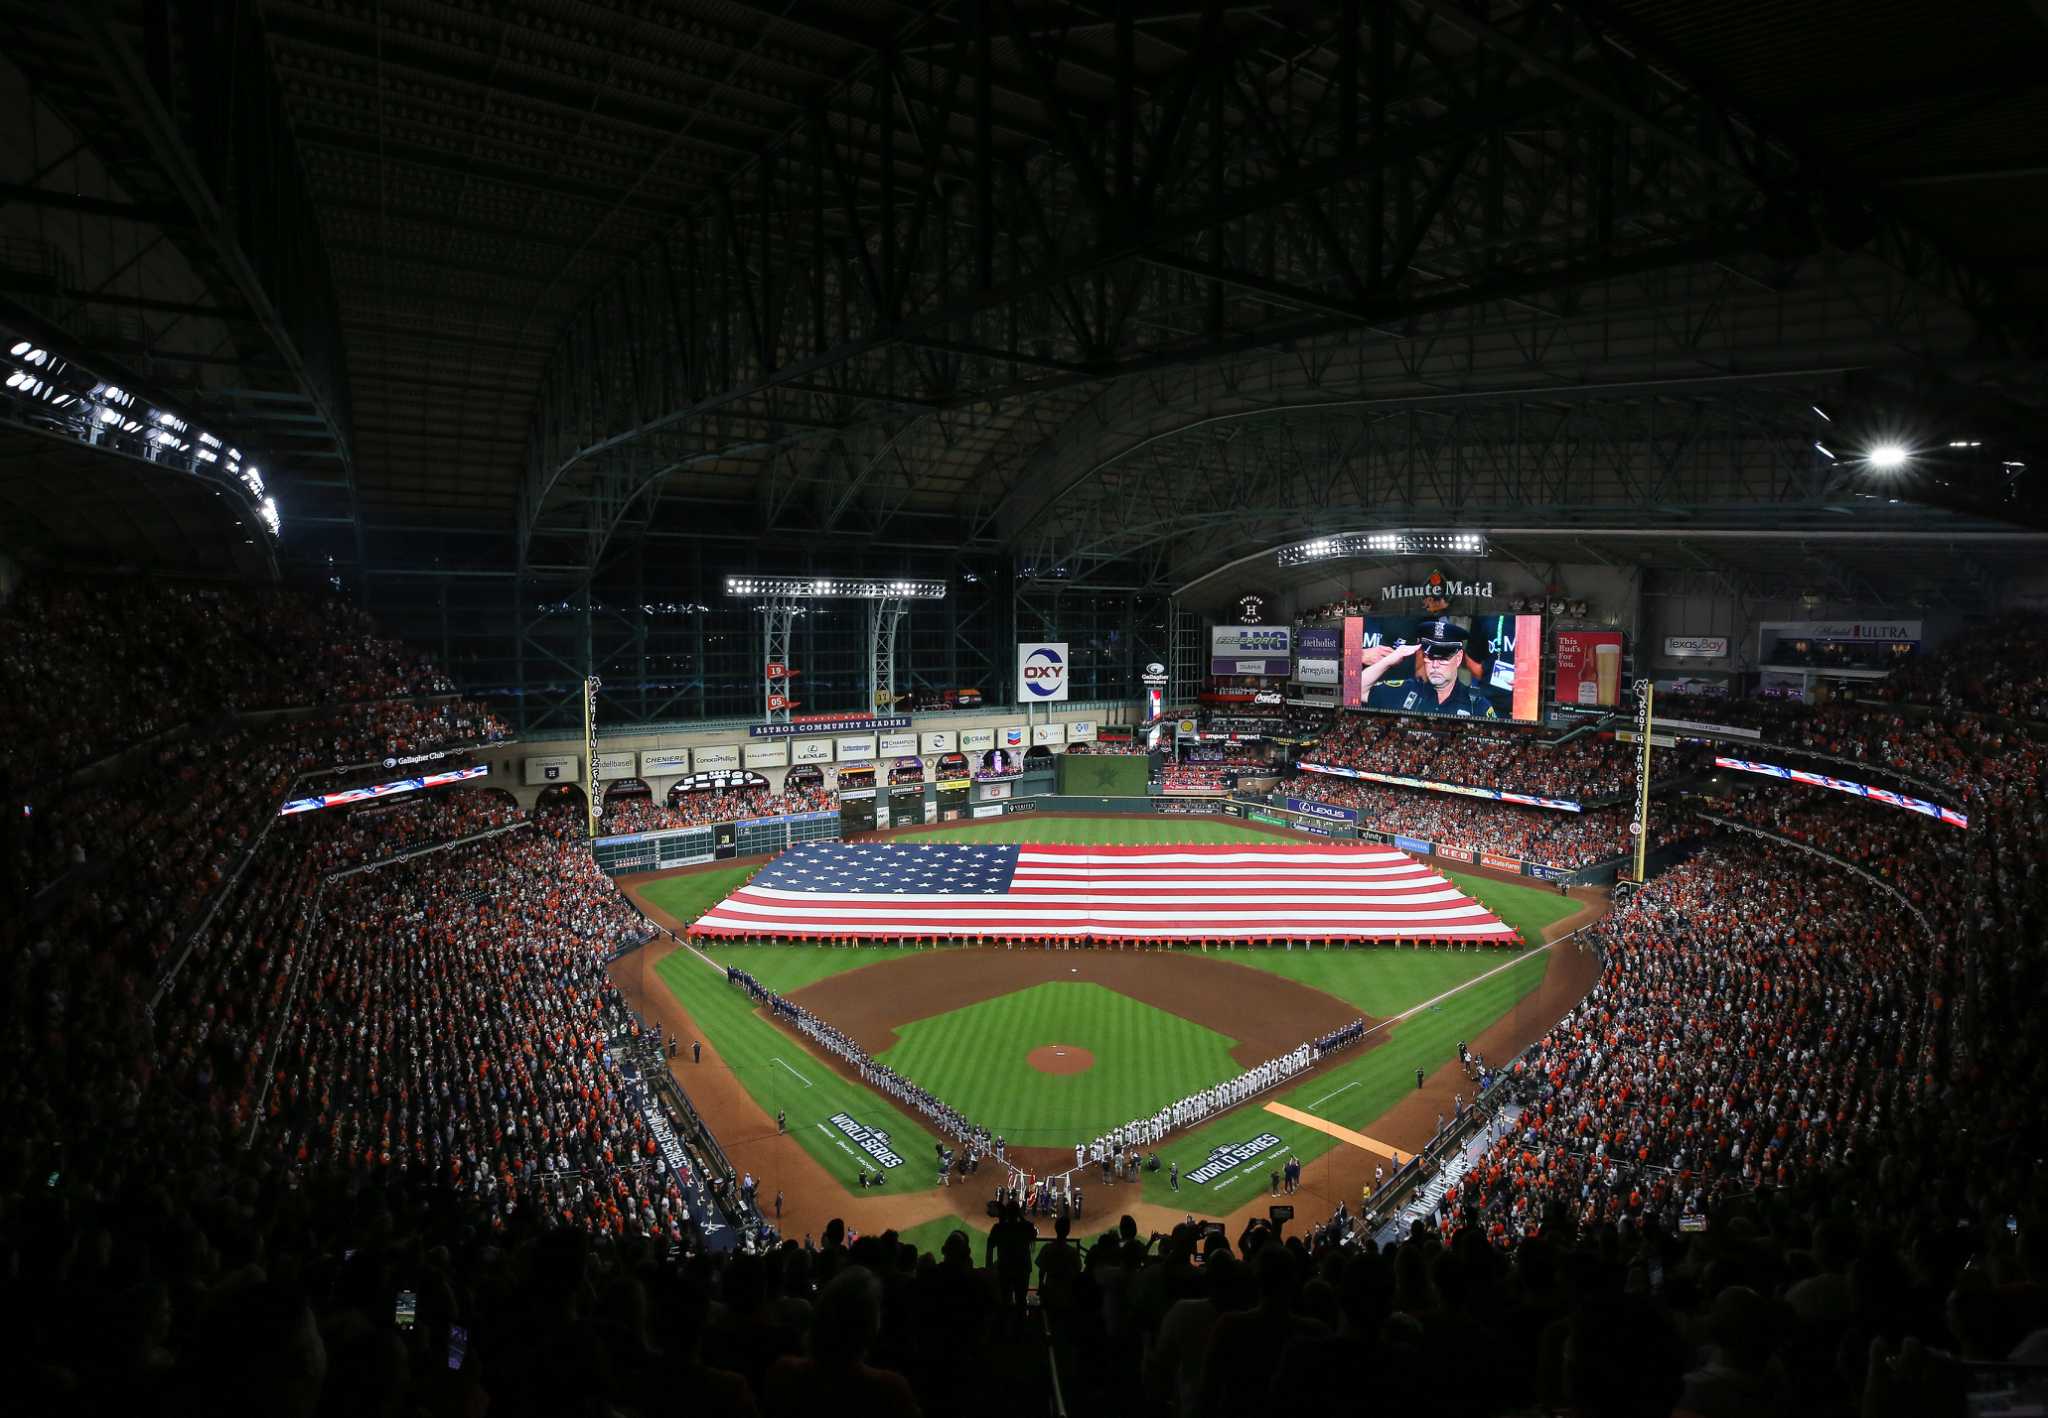 Information and details for watching a game at Minute Maid Park